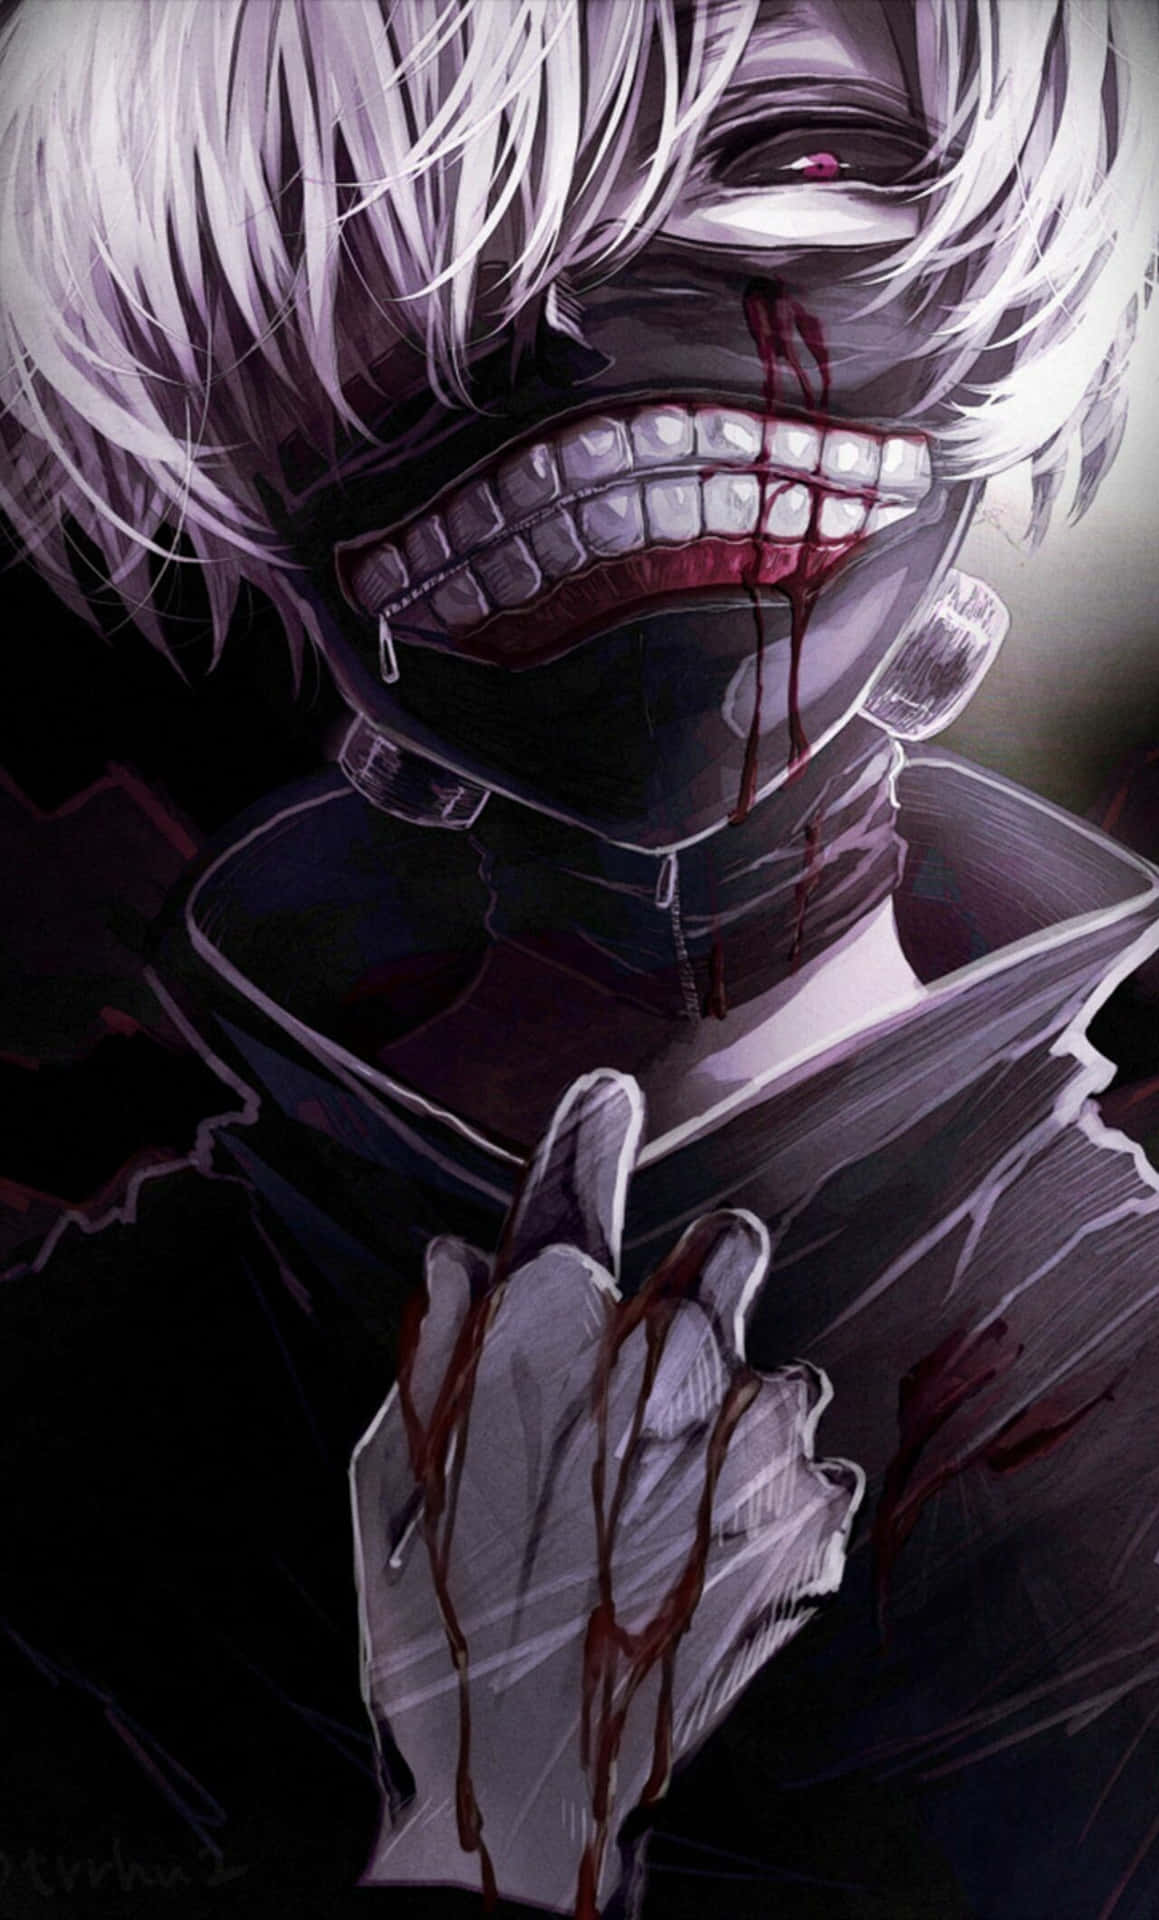 Image Cool Anime Iphone Wallpaper